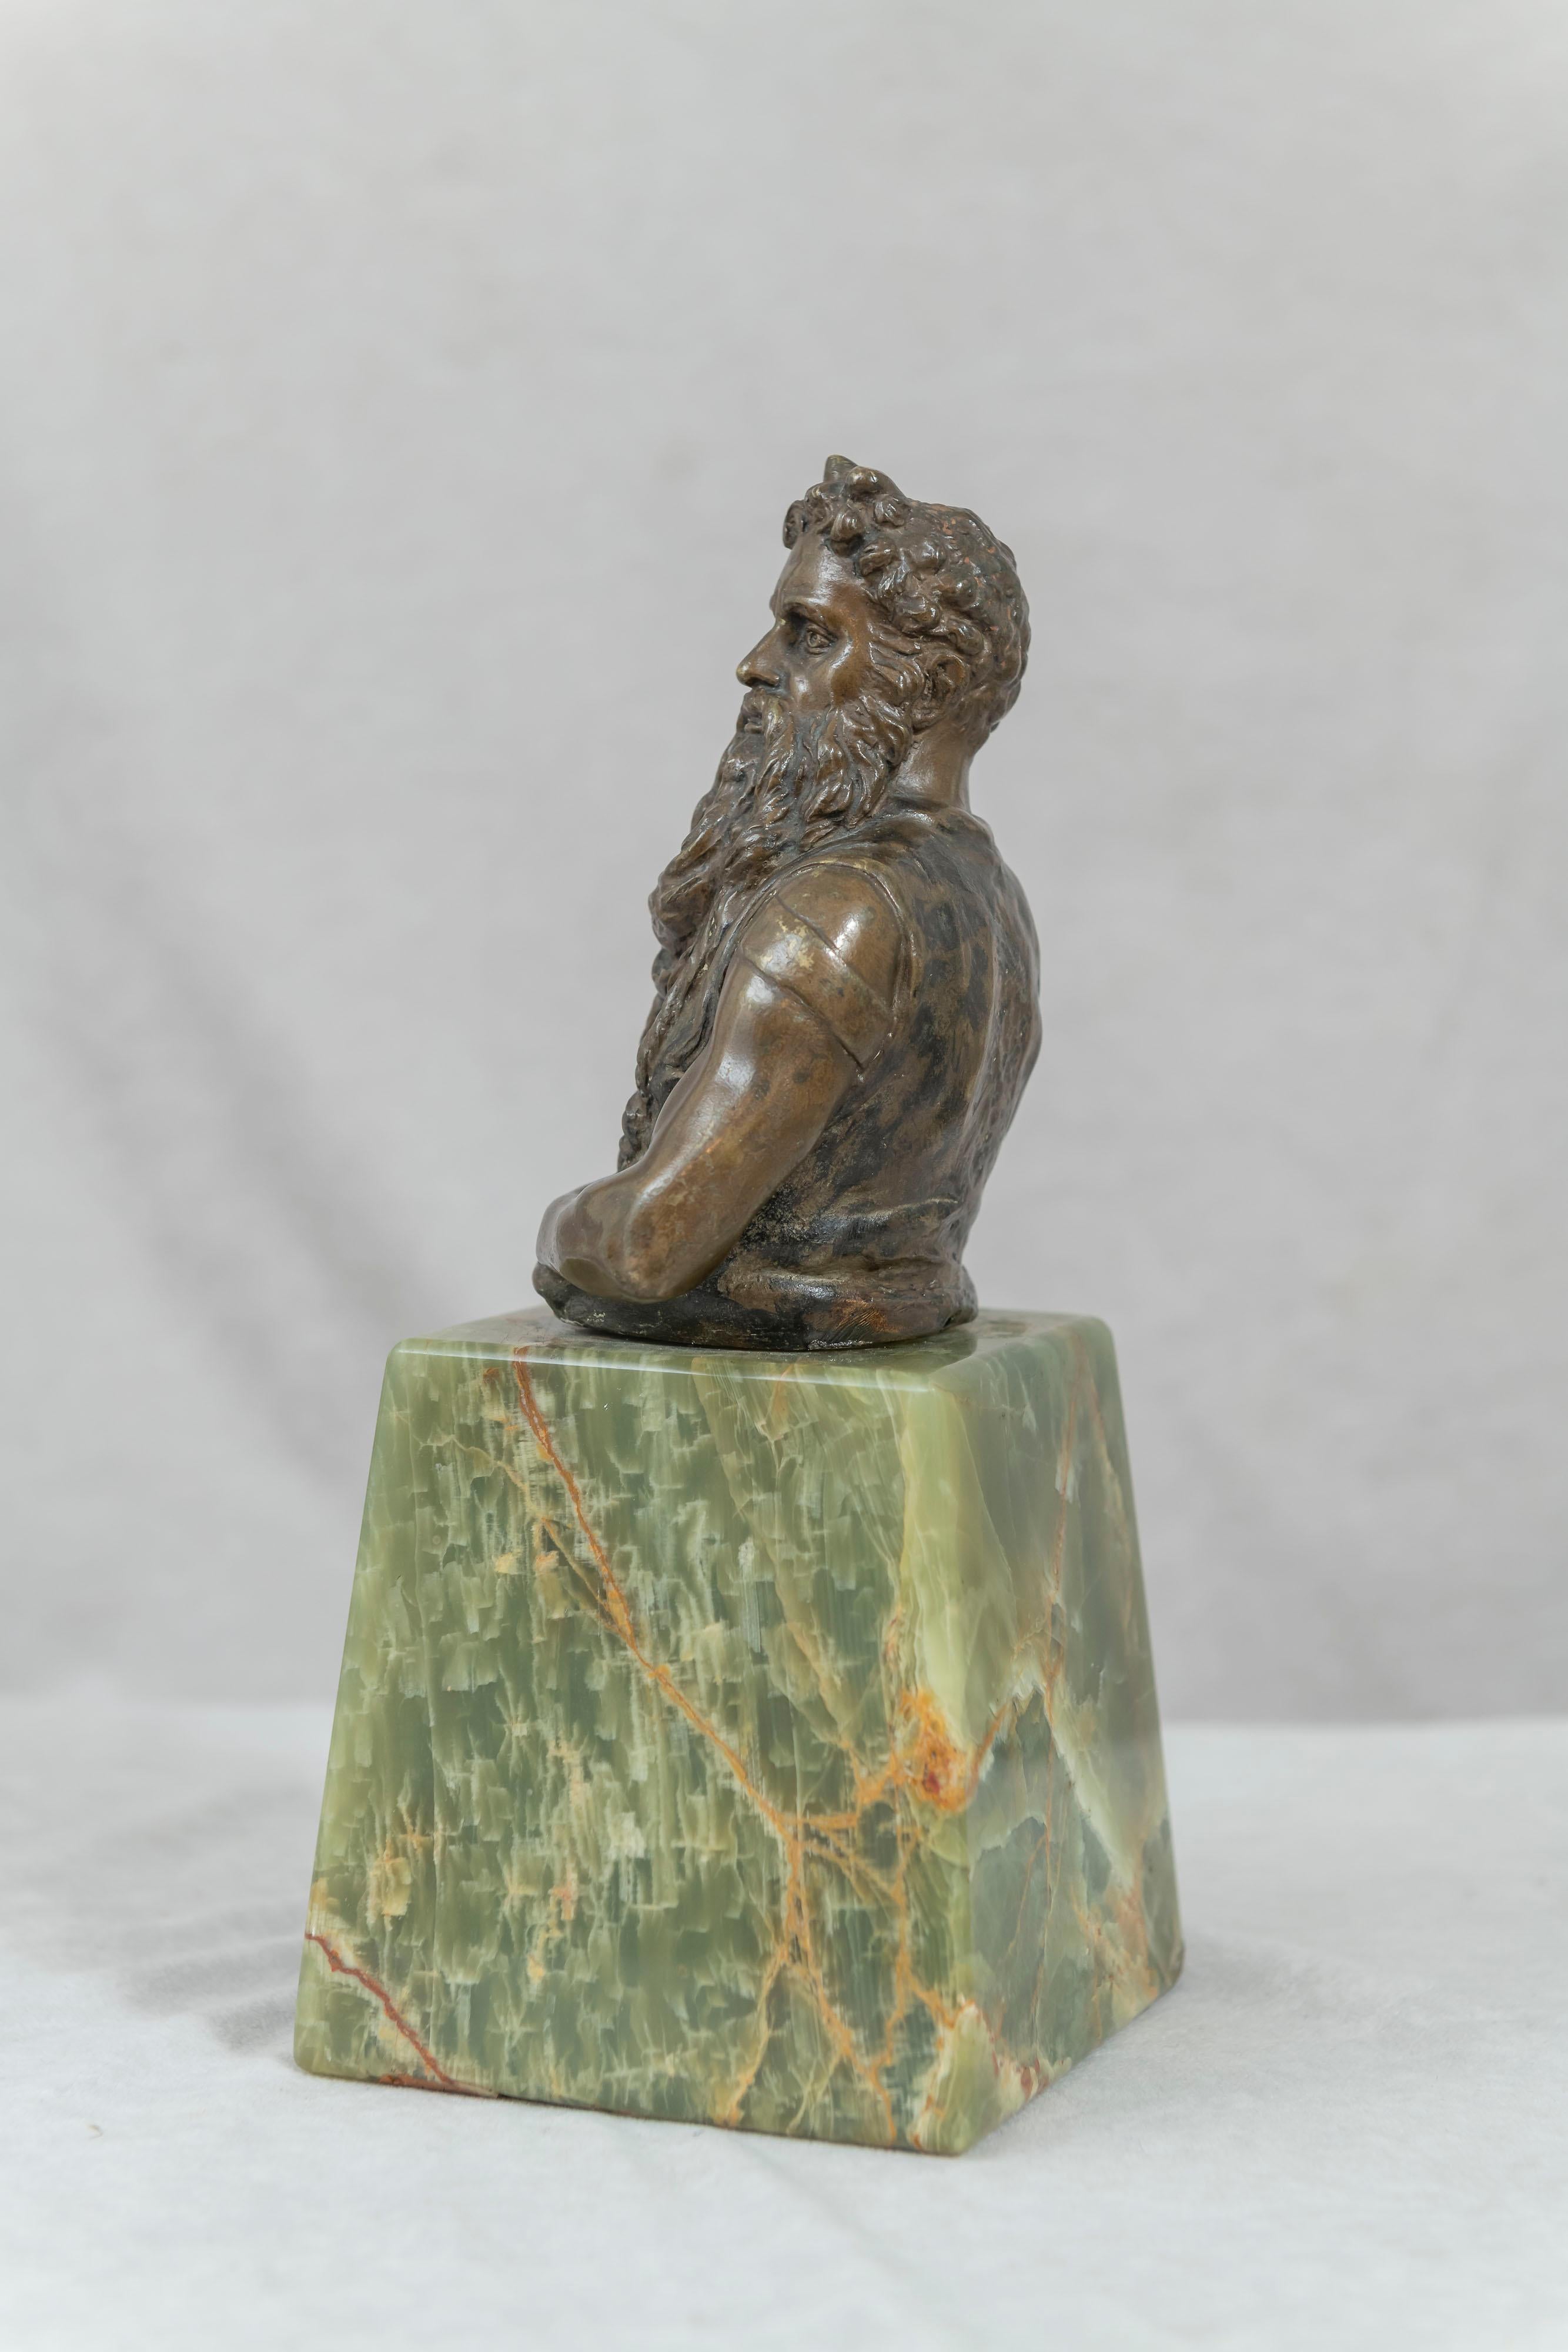 Austrian Antique Bronze Bust of Moses Mounted on Onyx with Plaque of 10 Commandments